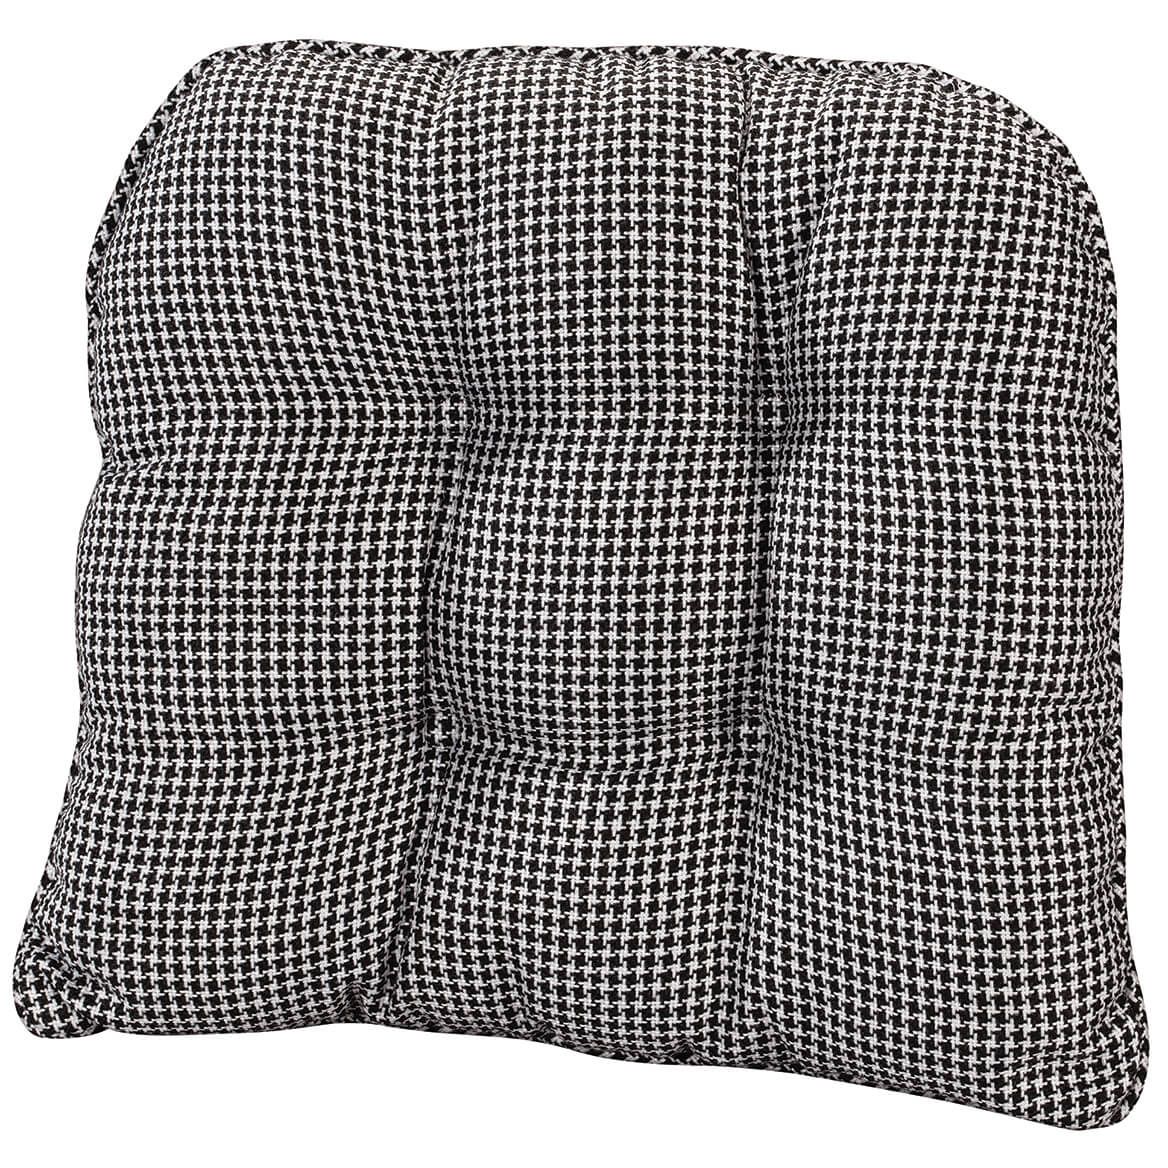 The Harlow Chair Pad by OakRidge™ + '-' + 372703